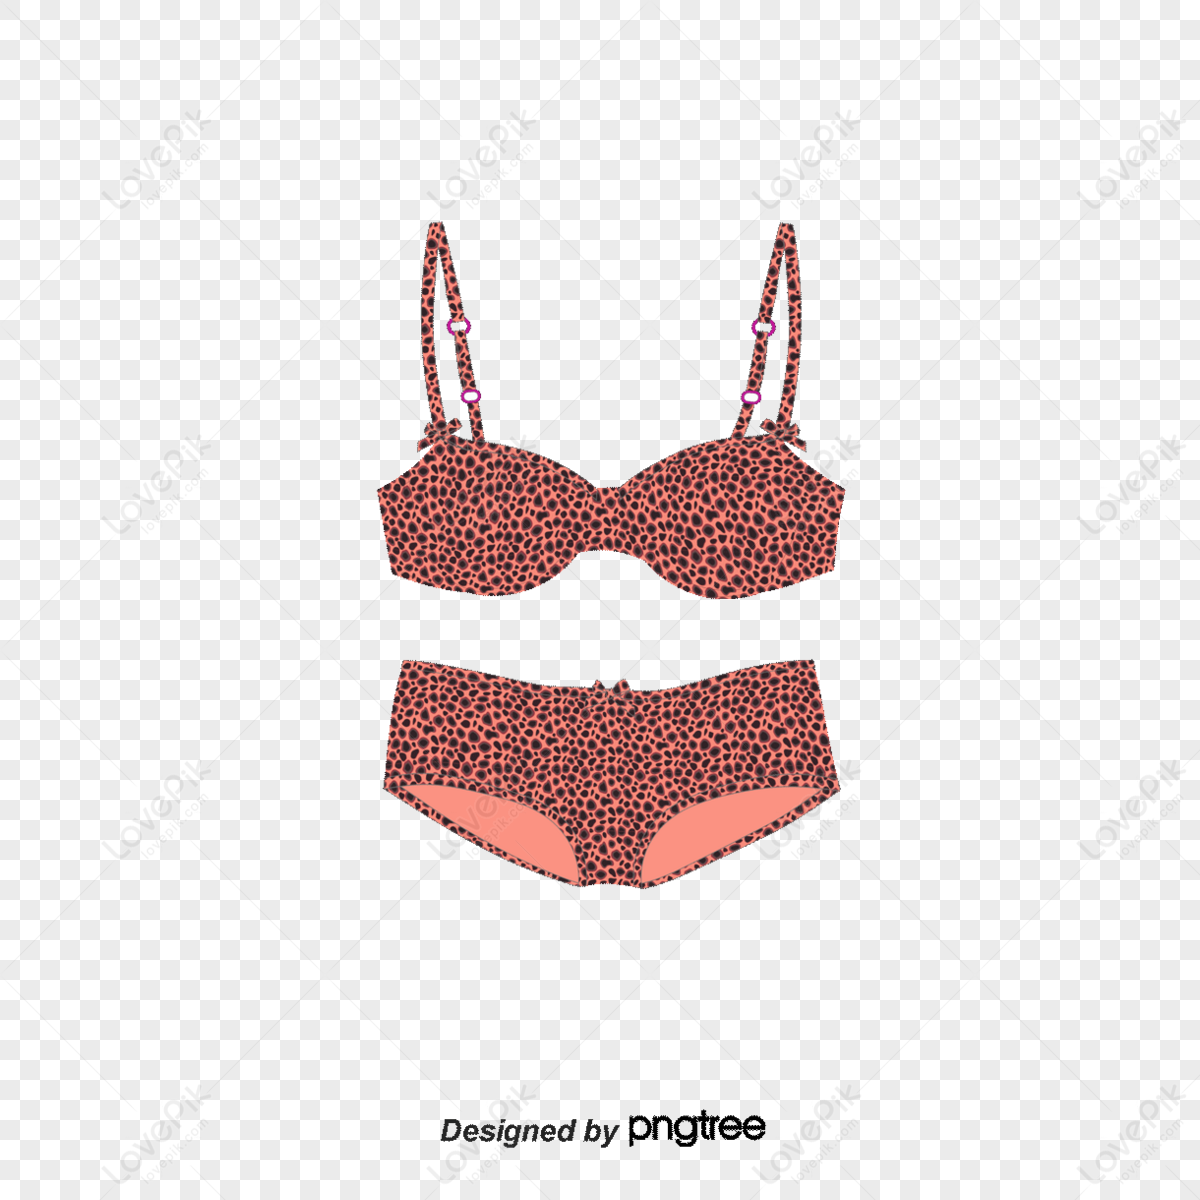 Ladies Underwear, Material, Sustainable Swimsuit, Free Element PNG  Transparent Background And Clipart Image For Free Download - Lovepik